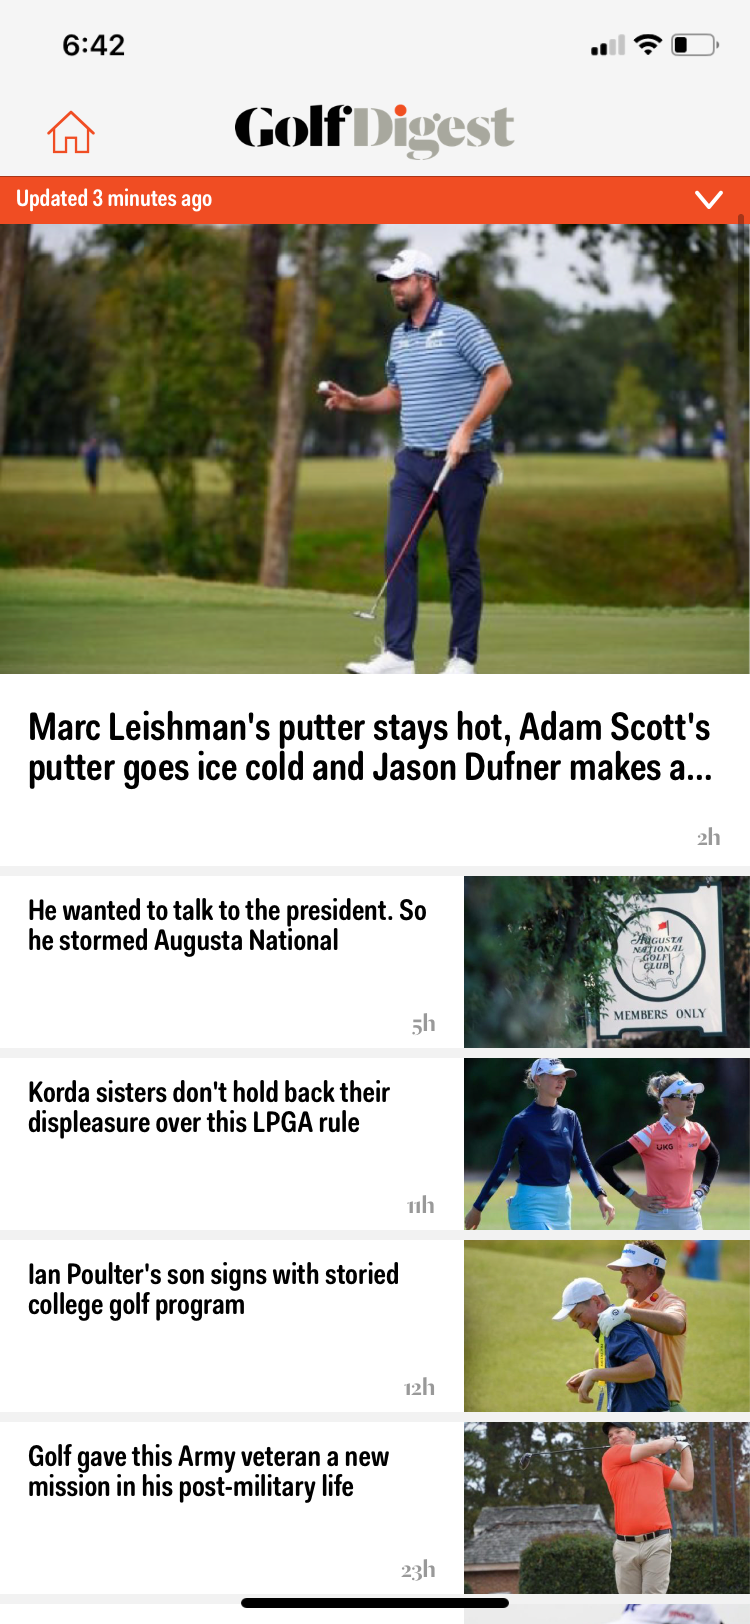 golf digest home page